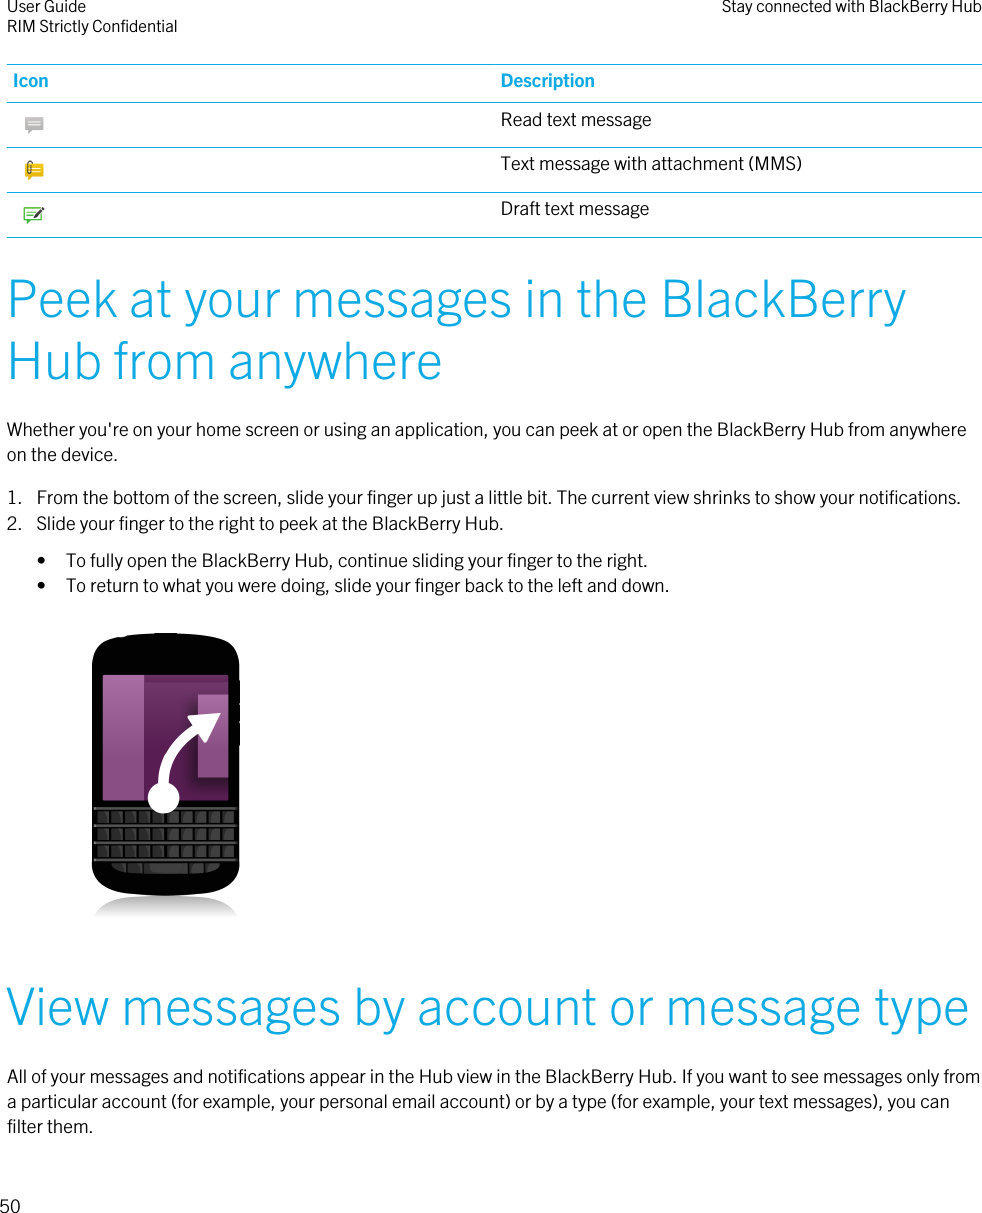 Icon Description Read text message Text message with attachment (MMS) Draft text messagePeek at your messages in the BlackBerryHub from anywhereWhether you&apos;re on your home screen or using an application, you can peek at or open the BlackBerry Hub from anywhereon the device.1. From the bottom of the screen, slide your finger up just a little bit. The current view shrinks to show your notifications.2. Slide your finger to the right to peek at the BlackBerry Hub.• To fully open the BlackBerry Hub, continue sliding your finger to the right.• To return to what you were doing, slide your finger back to the left and down. View messages by account or message typeAll of your messages and notifications appear in the Hub view in the BlackBerry Hub. If you want to see messages only froma particular account (for example, your personal email account) or by a type (for example, your text messages), you canfilter them.User GuideRIM Strictly Confidential Stay connected with BlackBerry Hub50